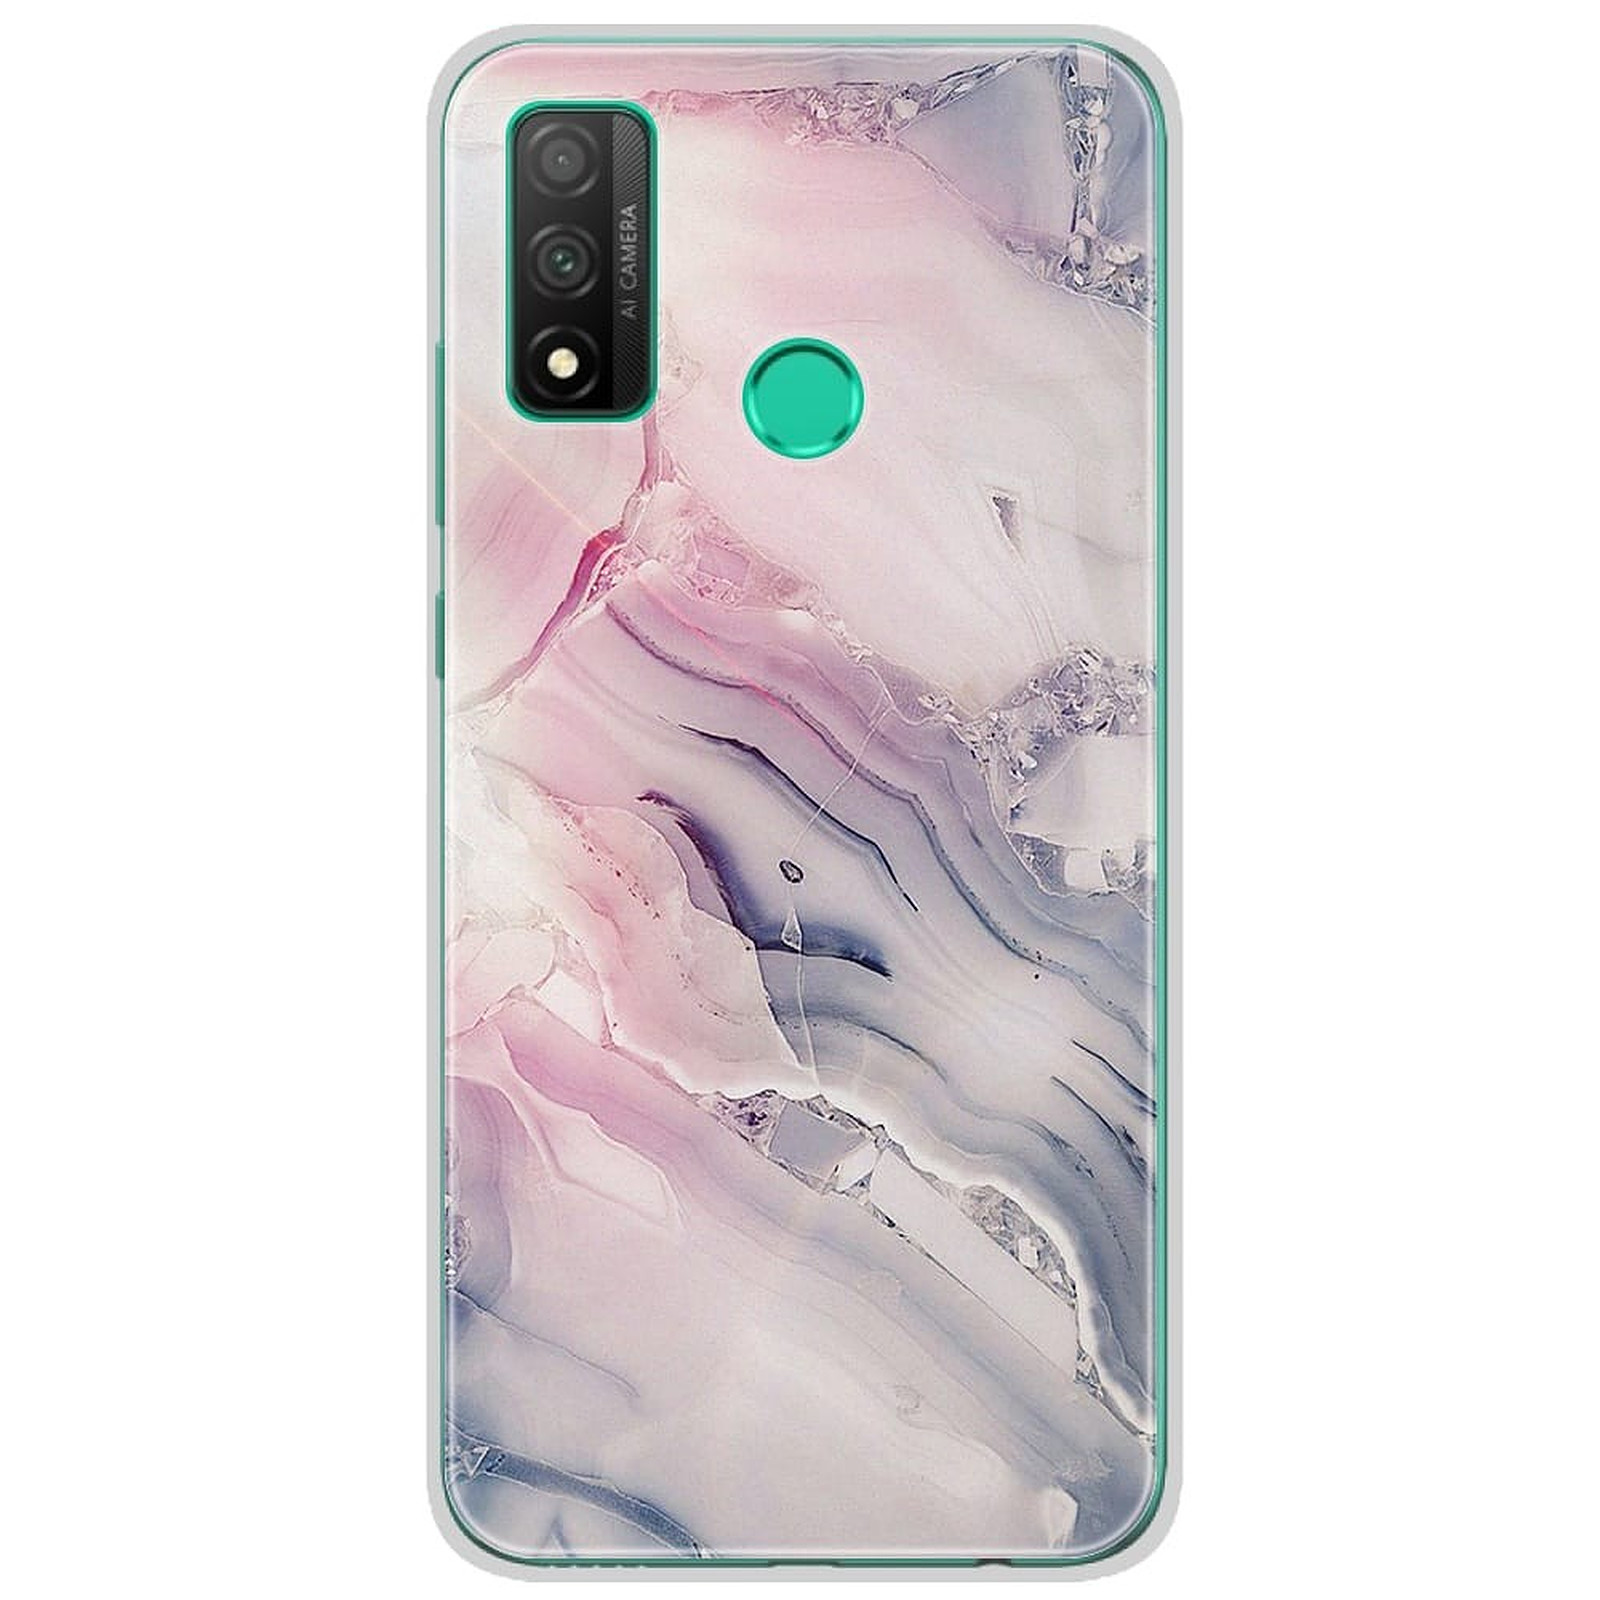 1001 Coques Coque silicone gel Huawei P Smart 2020 motif Zoom sur Pierre Claire - Coque telephone 1001Coques